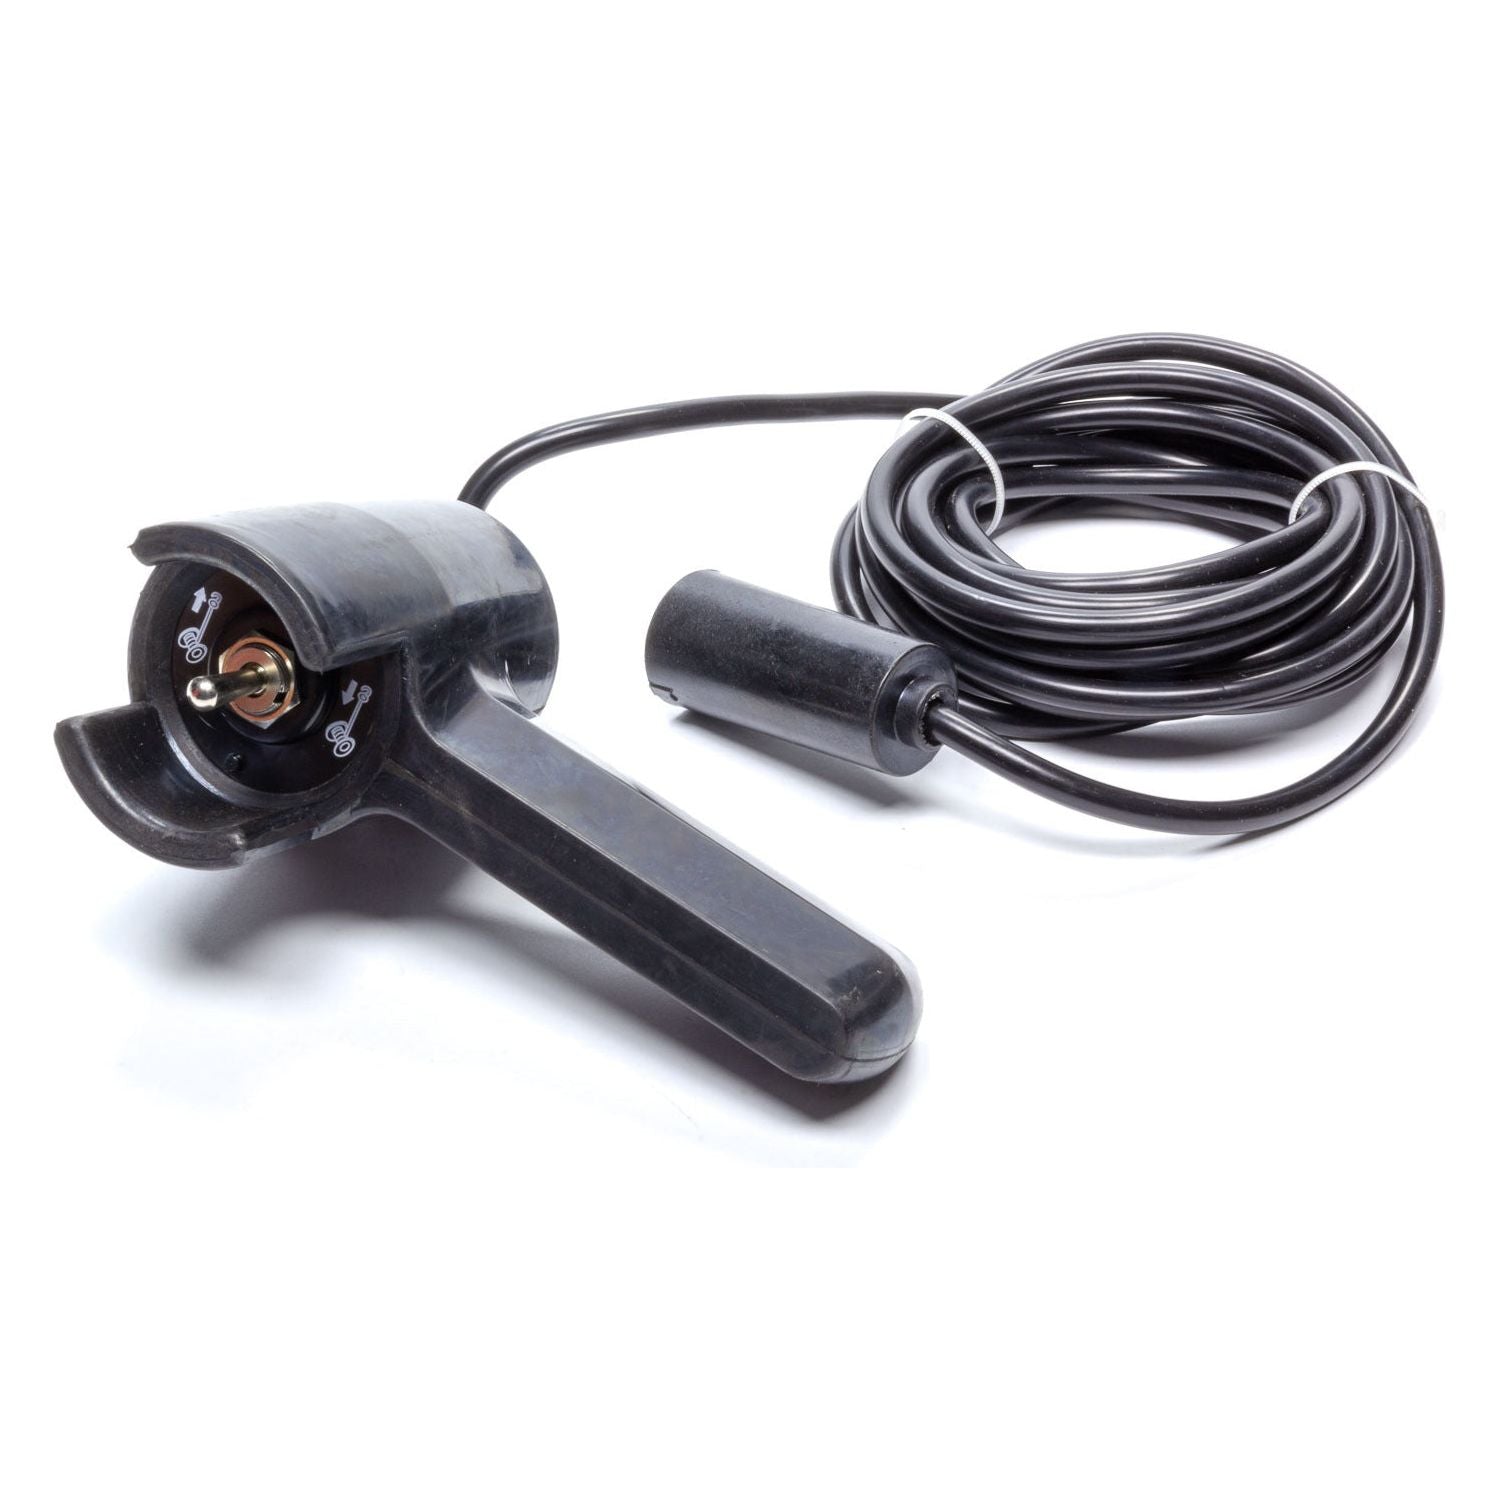 WARN 80172 - 12 ft handheld Control Kit for 93700 Winch